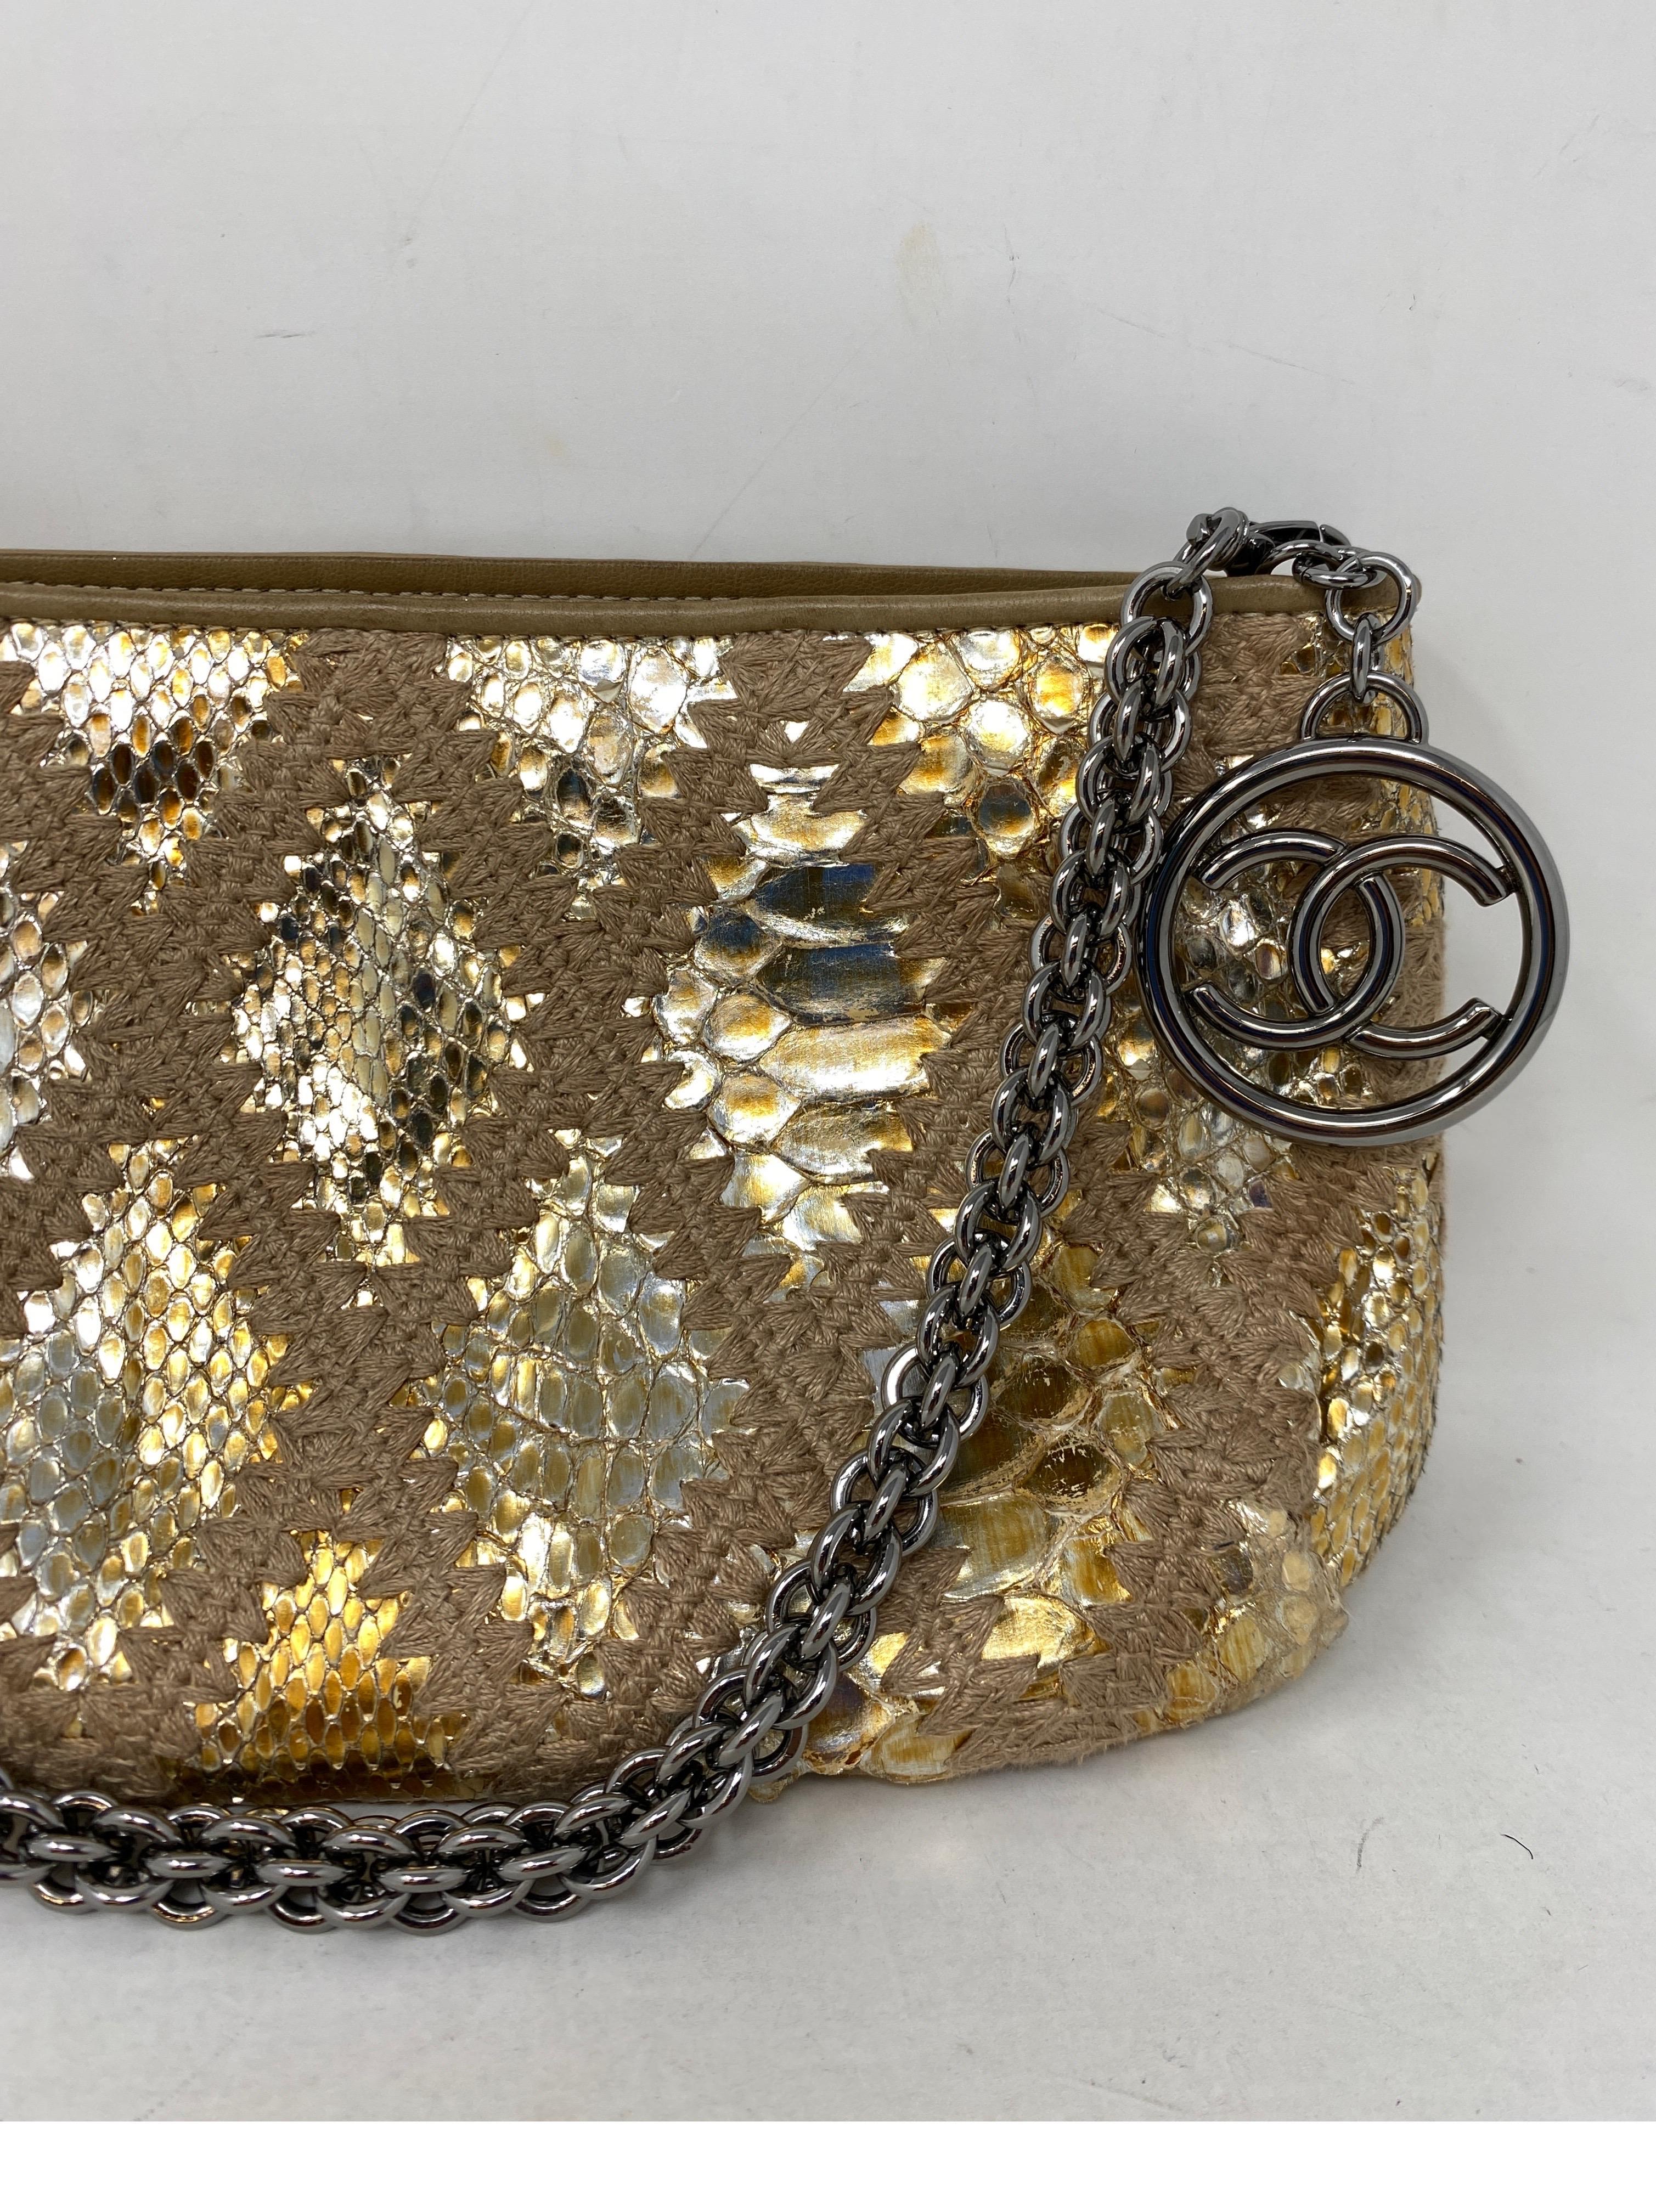 Chanel Gold Snakeskin Clutch. Excellent condition. Gold and silver clutch and pouch bag. Can be worn as a small shoulder bag. Great evening attire accessory or statement piece. Interior clean. Ruthenium strap and hardware. Includes authenticty card.